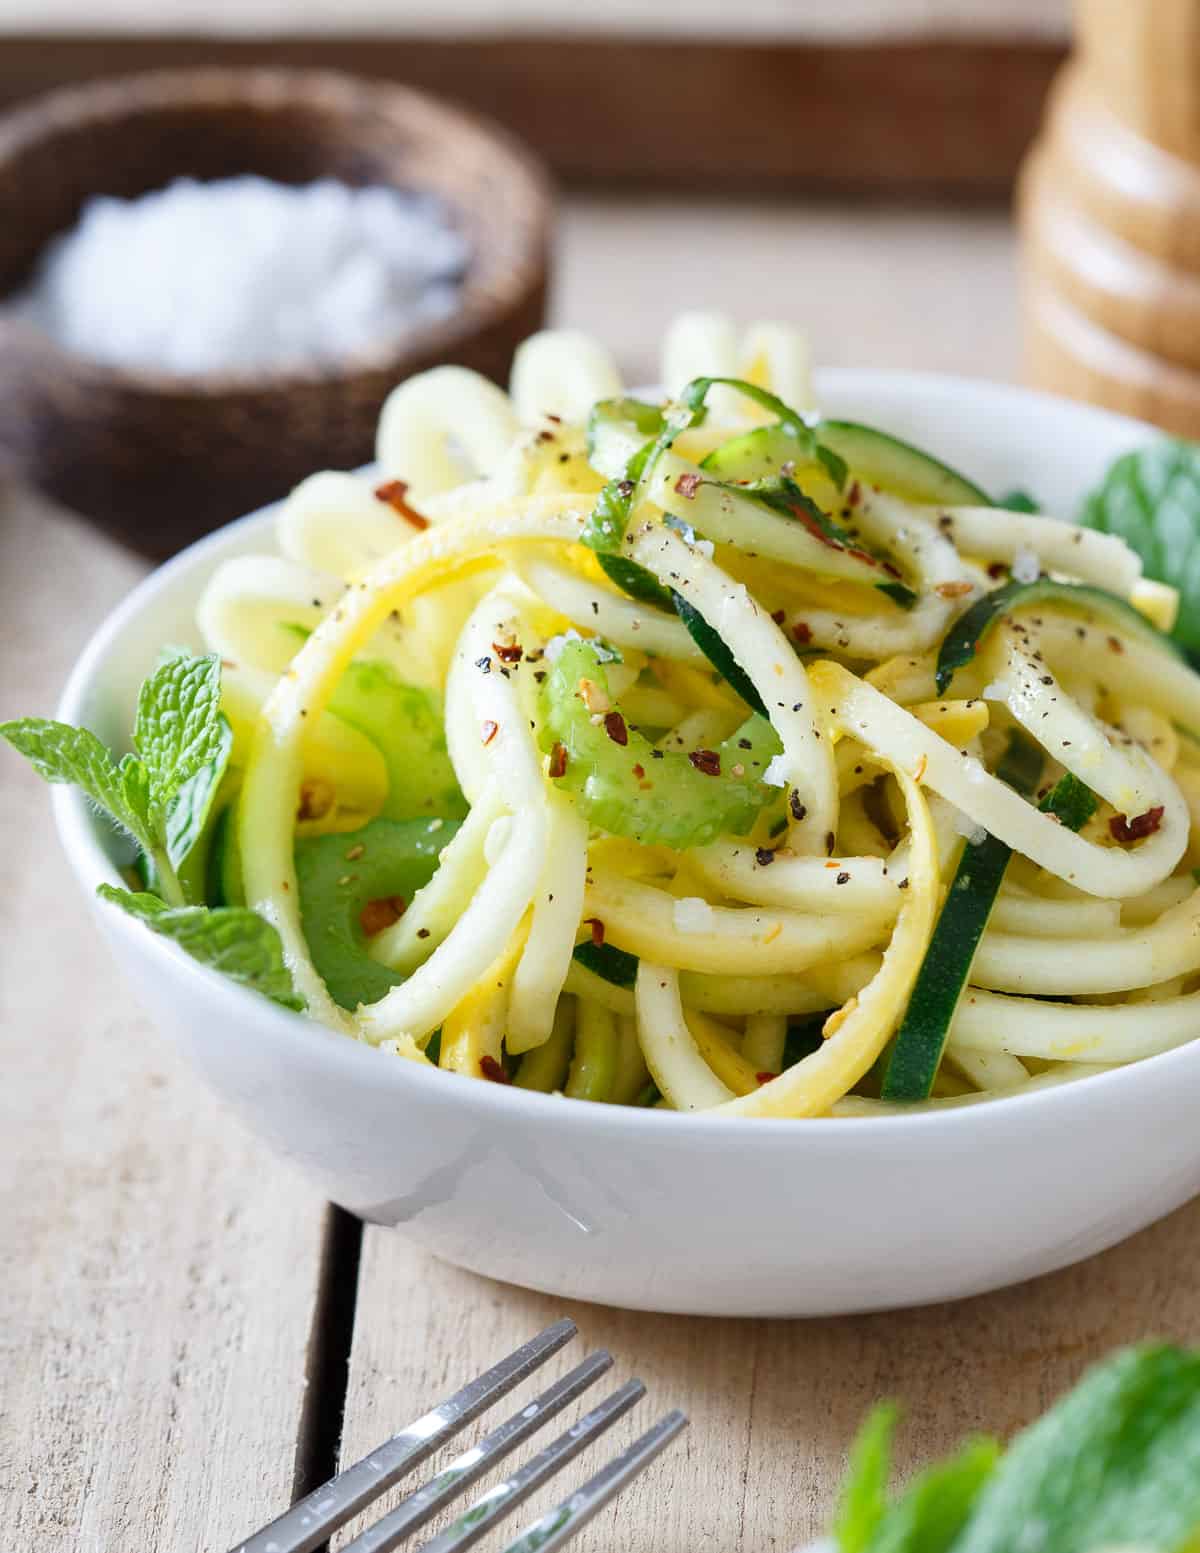 Basil and Mint Squash Noodles are a quick and easy refreshing side or salad that comes together in just minutes.